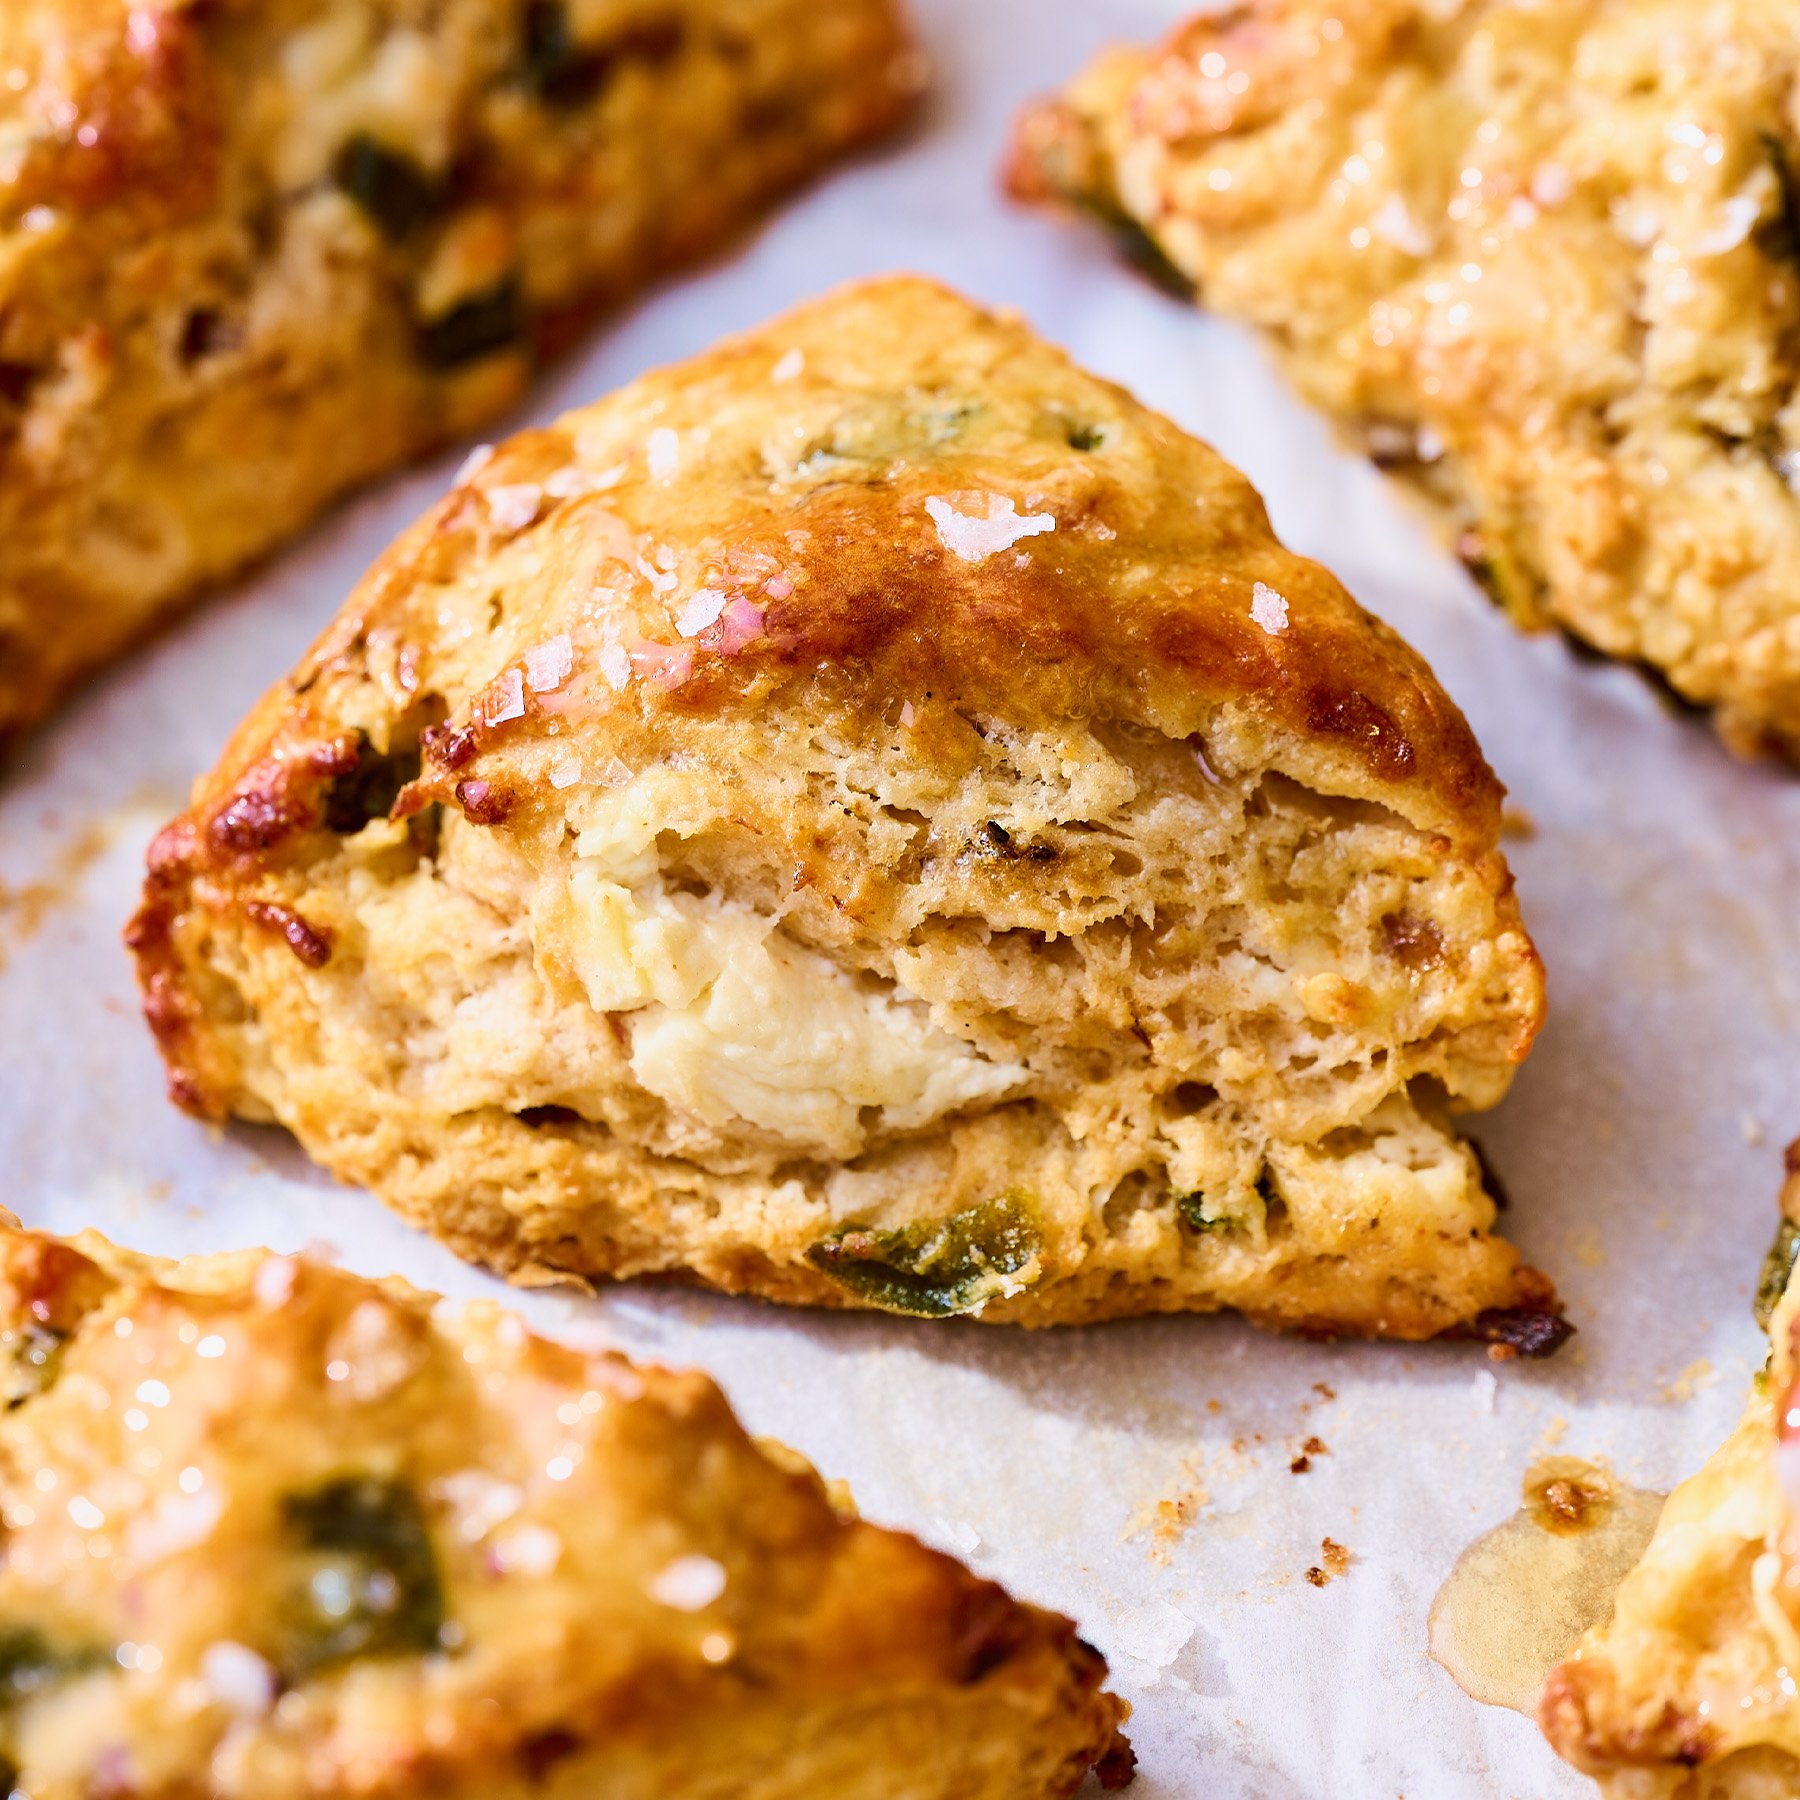 one savory scone up close, so you can see the goat cheese, shallots and jalapenos inside the flaky layers.